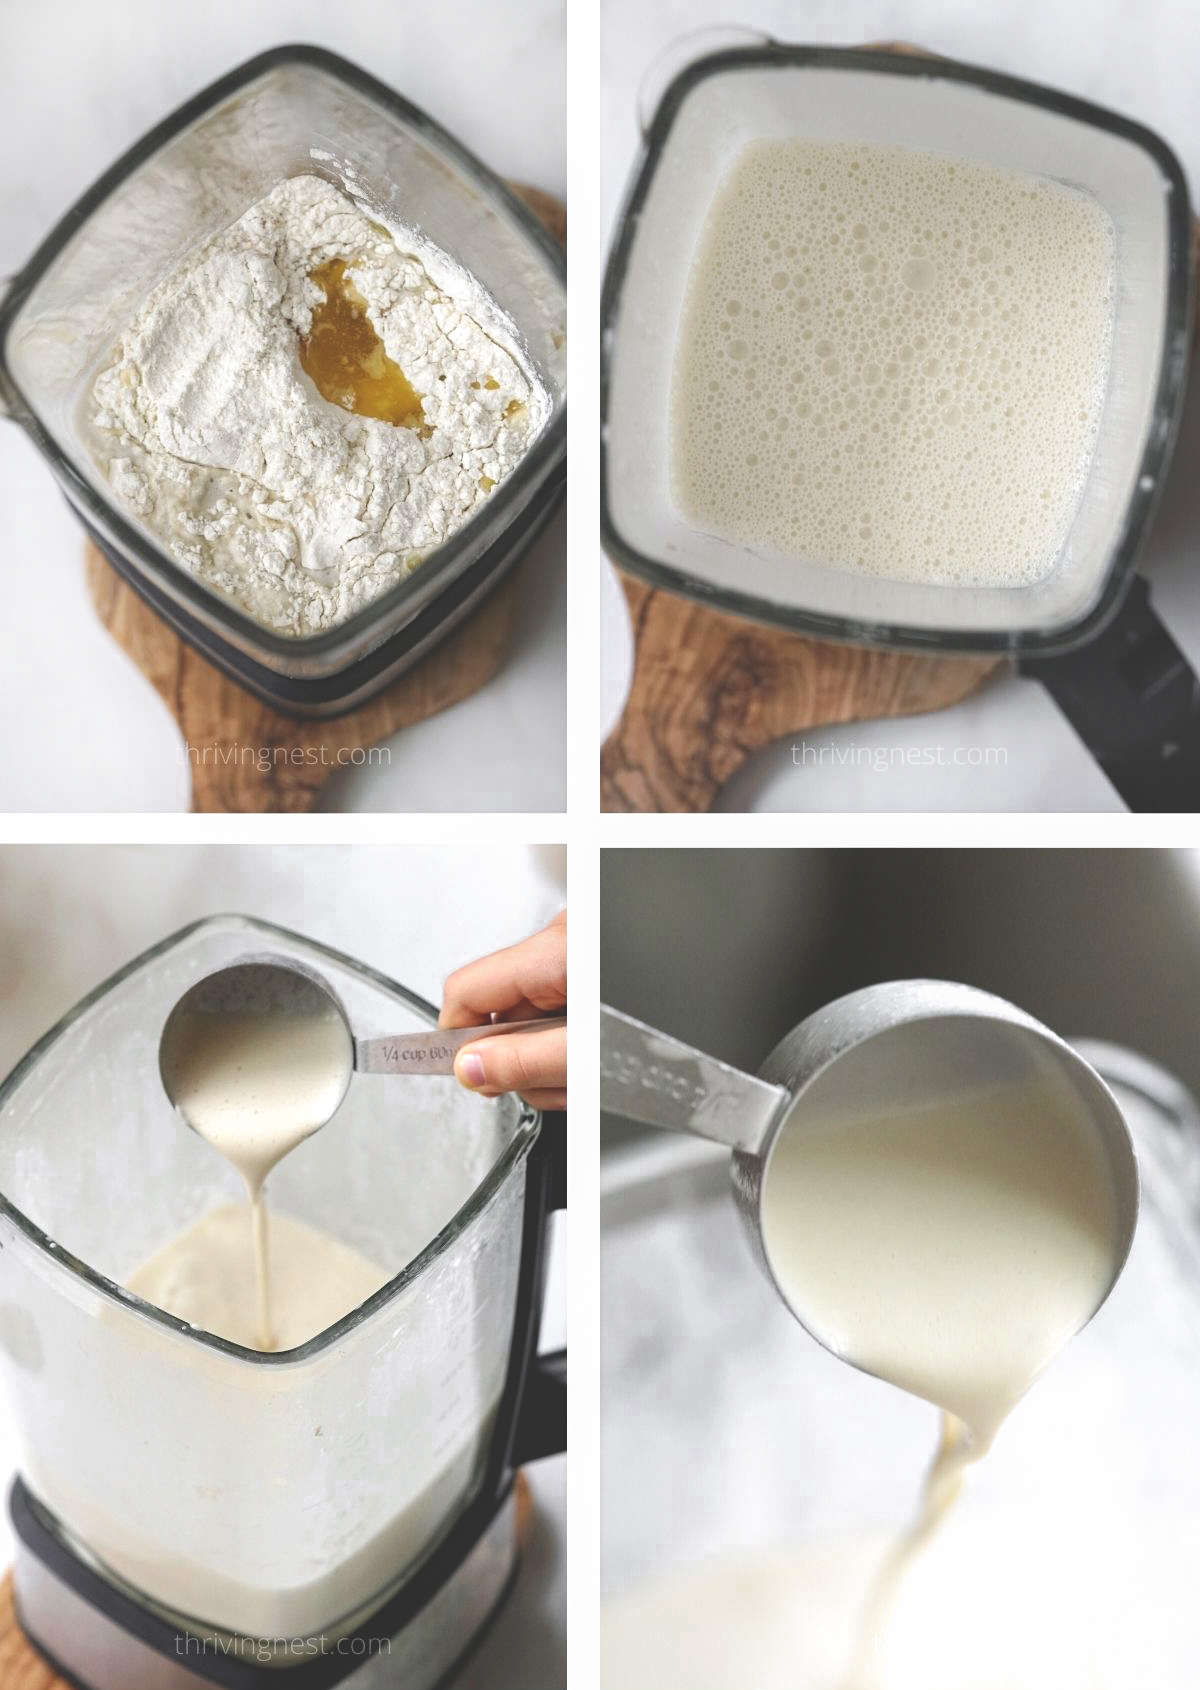 Process shots showing how to make crepe batter in a blender.